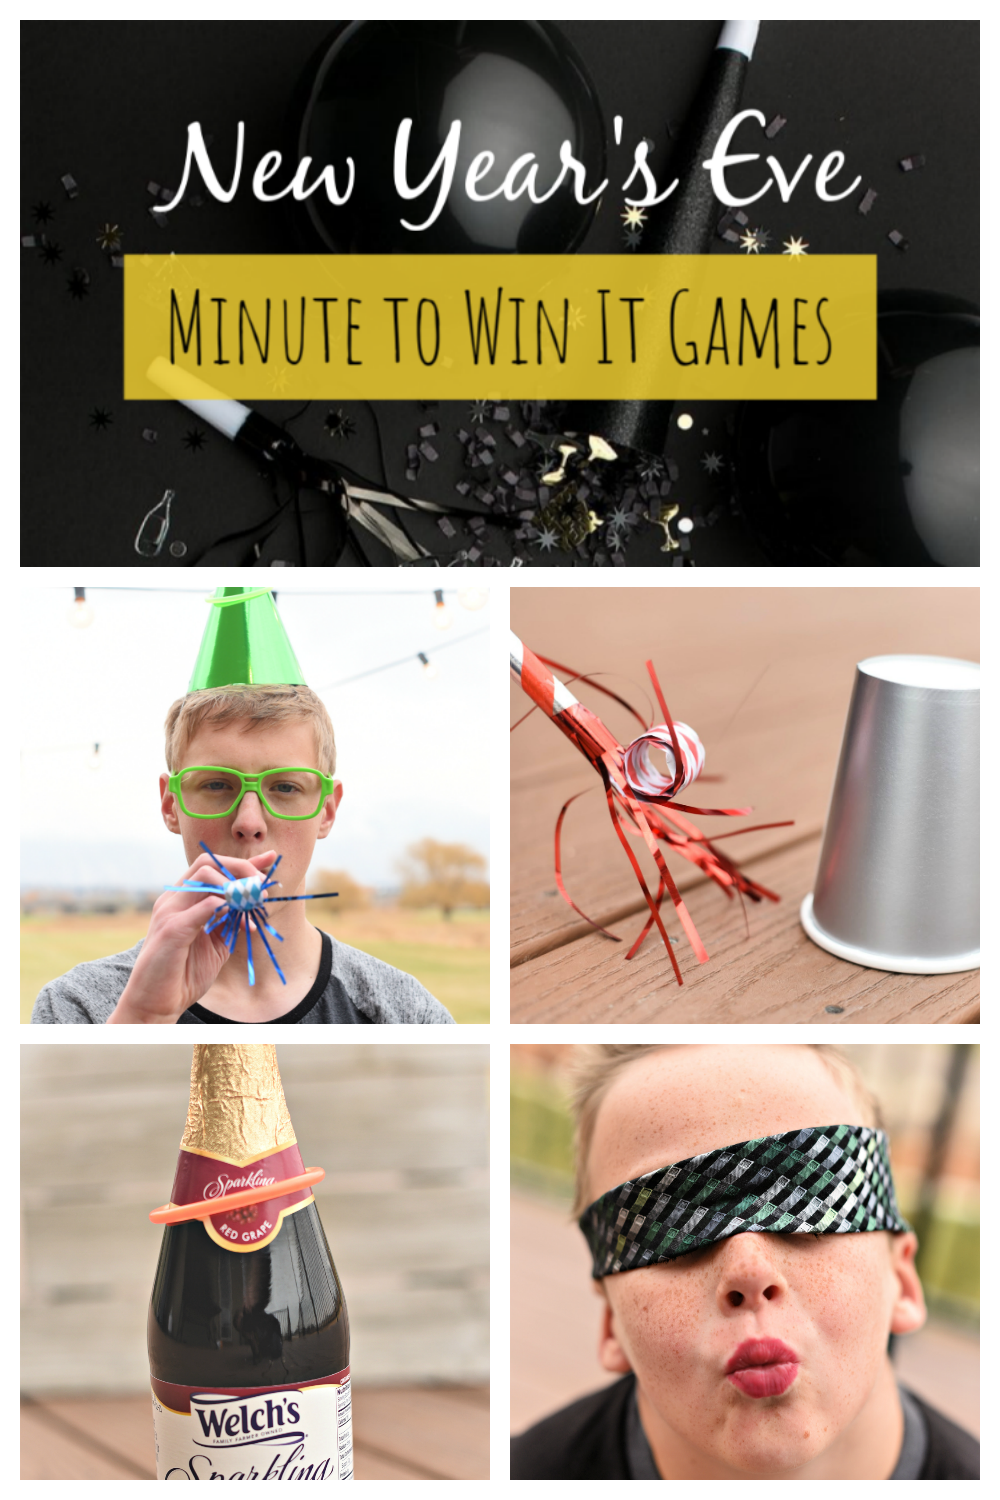 New Year's Eve Minute to Win It Game to play with the whole family or at any NYE party #nye #minutetowinit #partygames #newyearseveparty